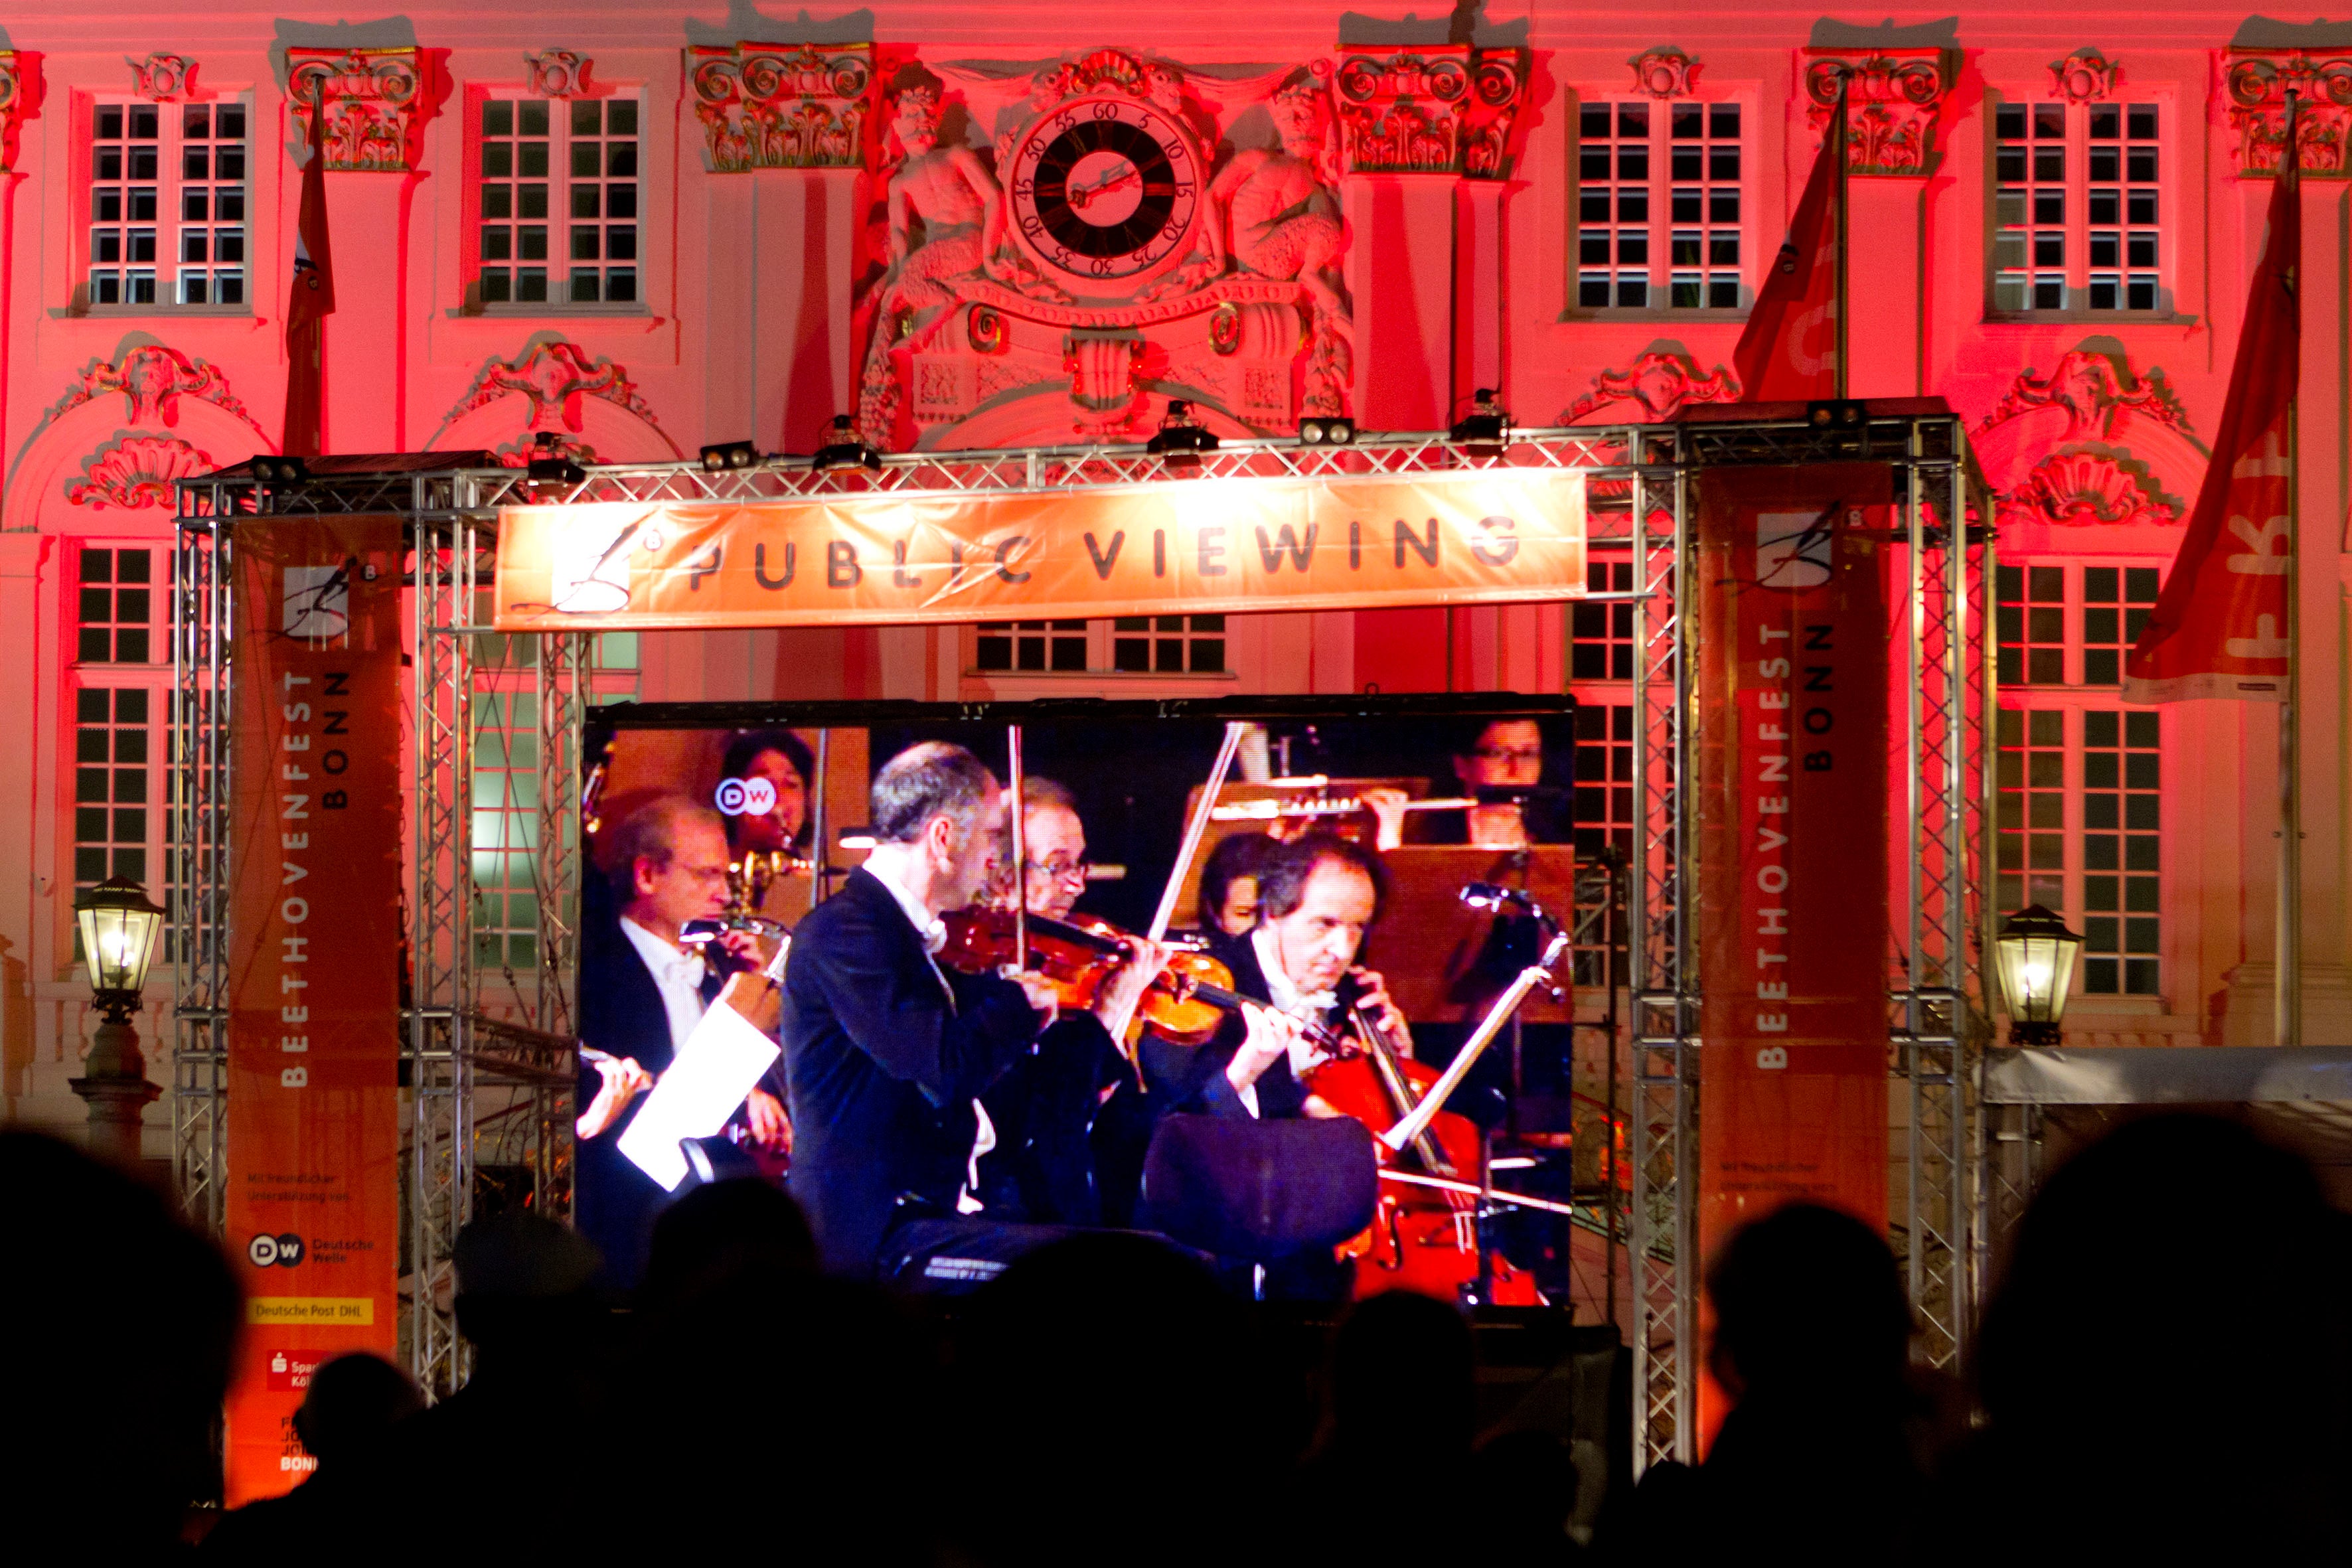 Every year several thousand people watch the broadcasts of the Beethoven festival in the market in front of the old town hall